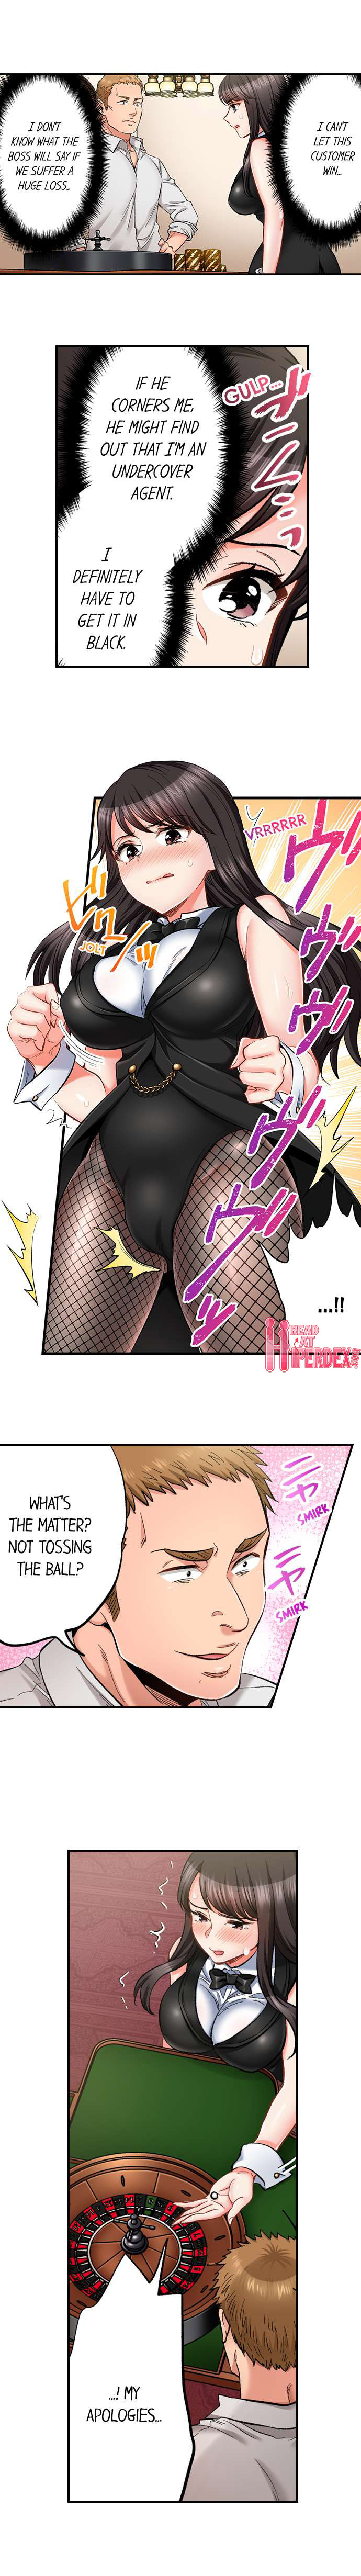 Sex is Part of Undercover Agent’s Job? - Chapter 52 Page 6